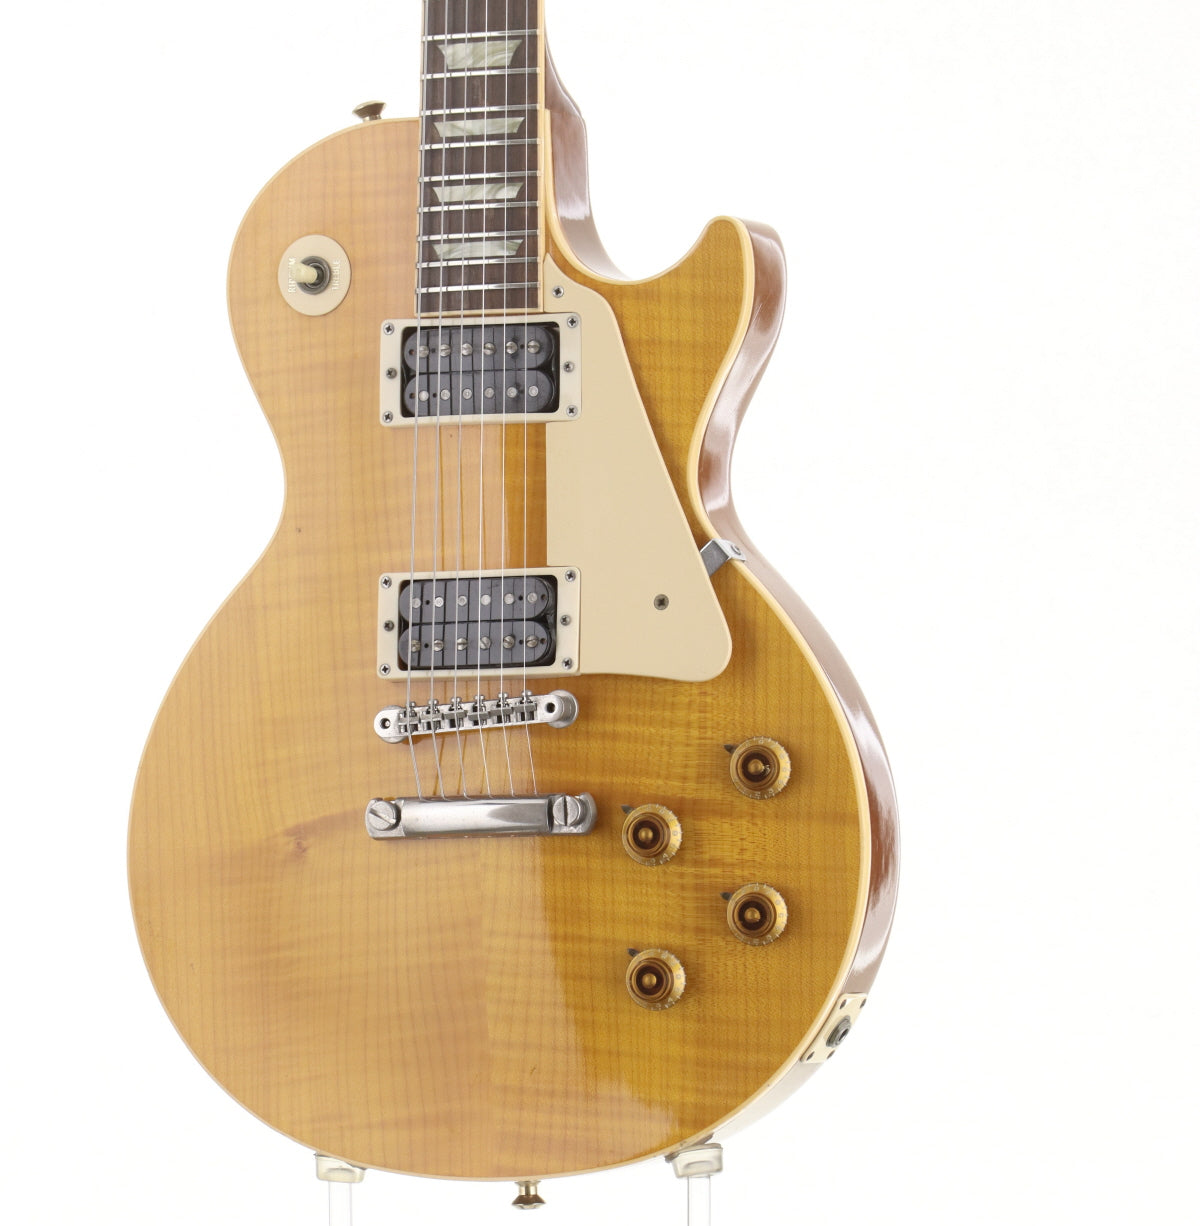 [SN 2 0997] USED Gibson USA / Les Paul Classic Plus Transparent Amber [03]